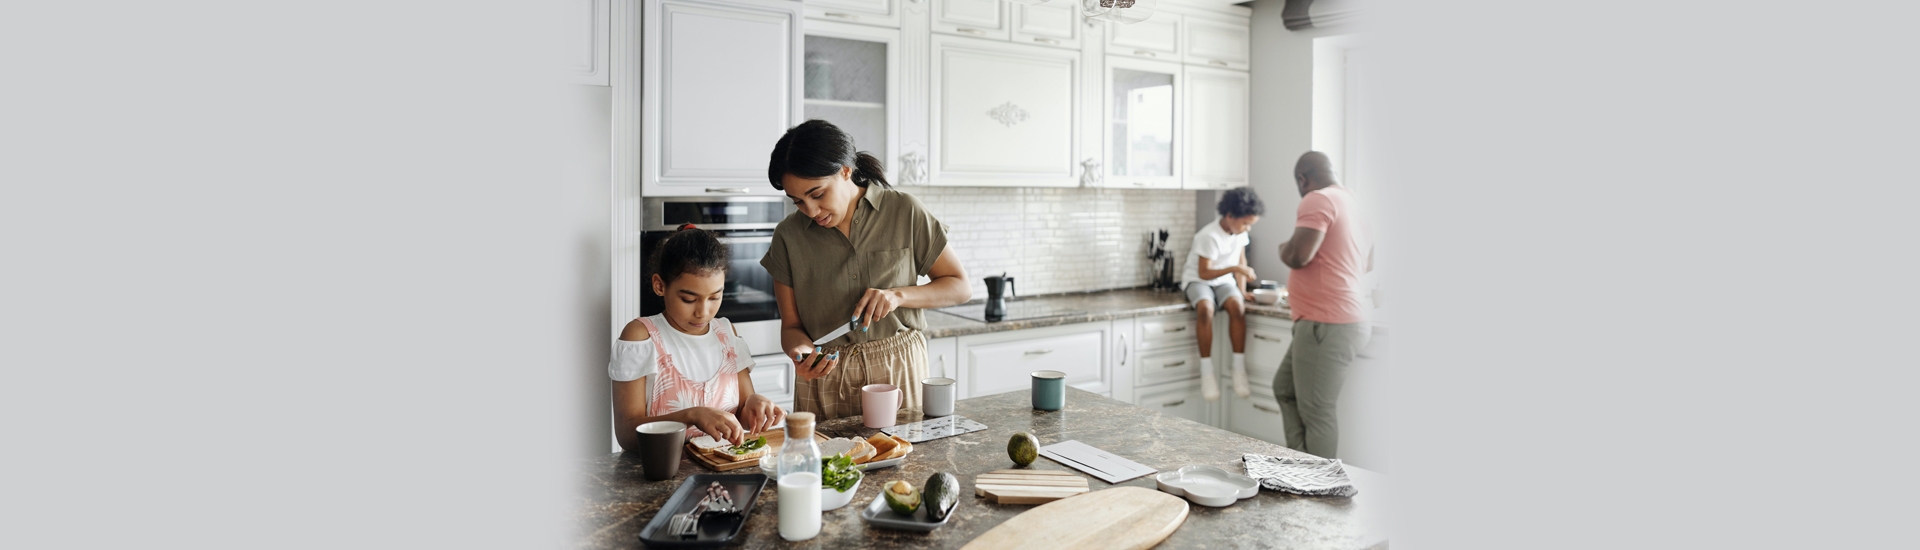 Are Your Kitchen Habits Damaging Your Health?